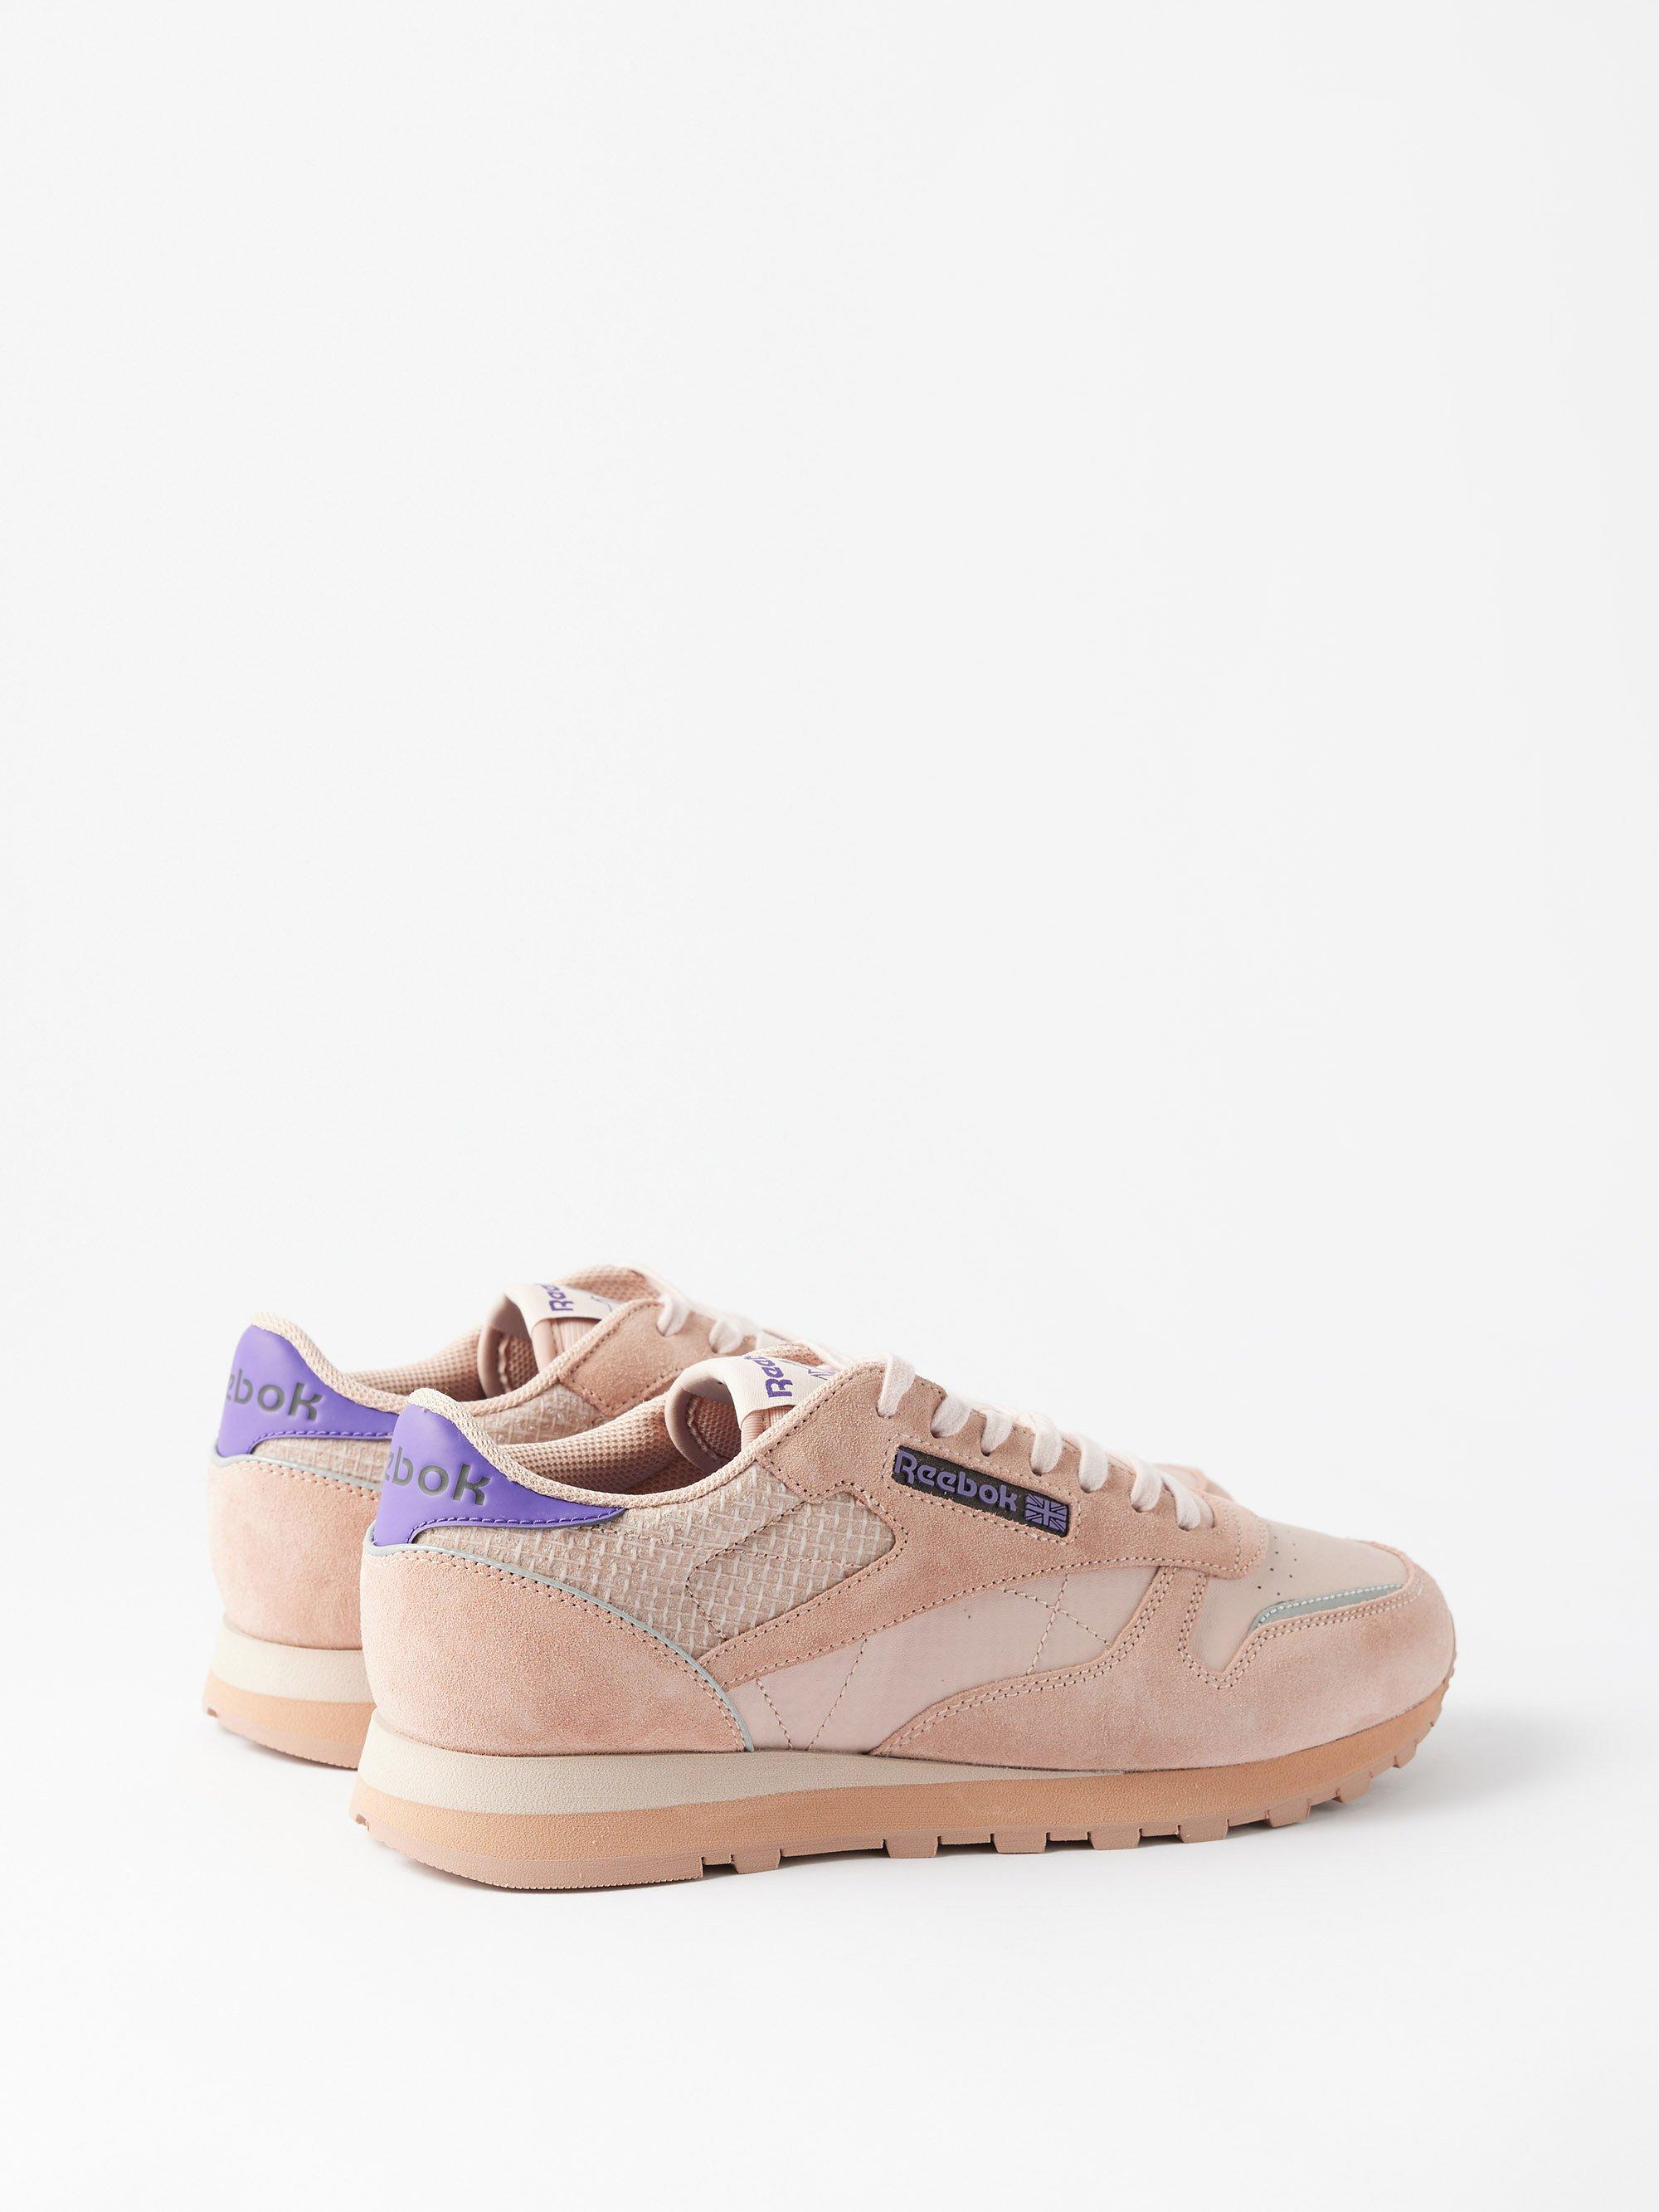 Reebok Classic Suede, Mesh And Leather Trainers in Pink | Lyst